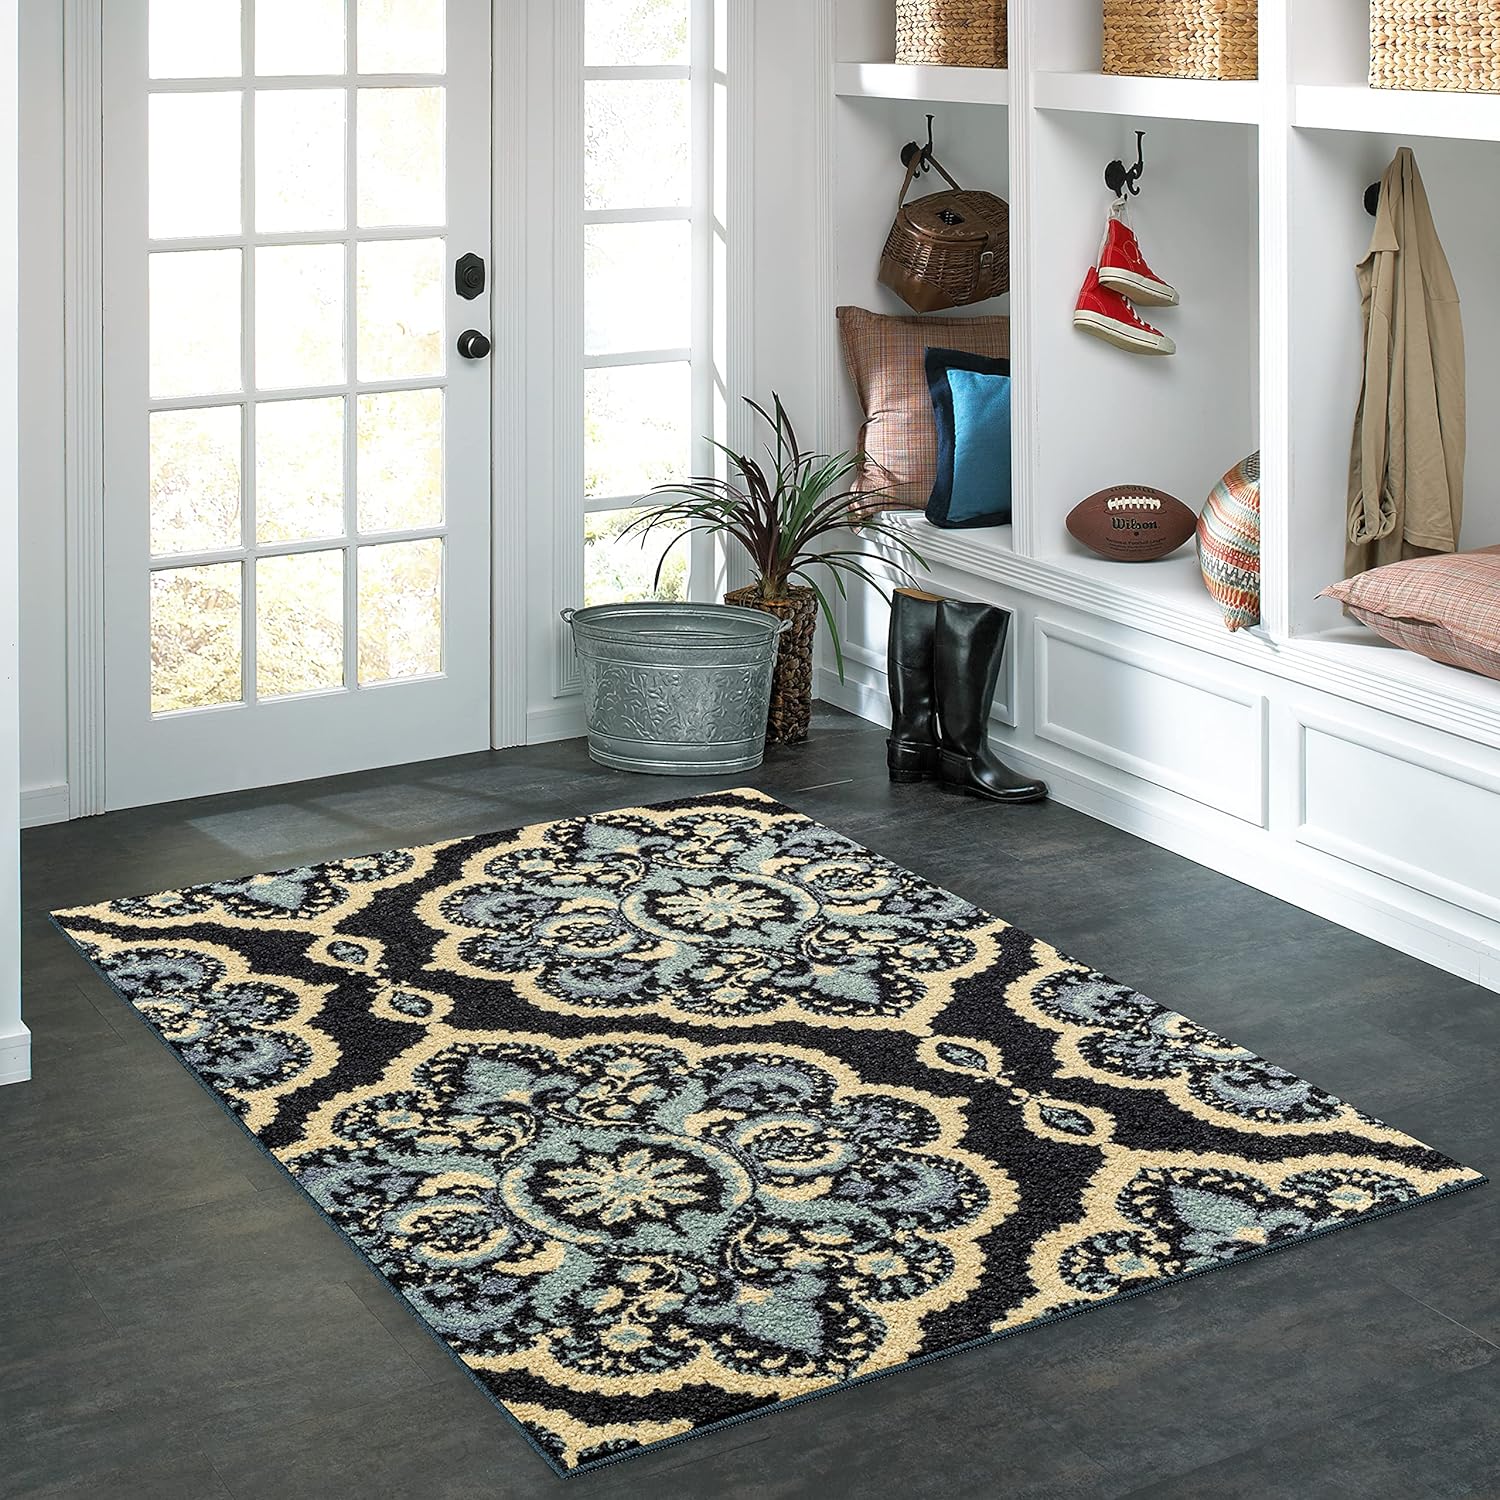 I bought many of the Maples Vivian Medallion pattern in grey. I have special needs pets and a child so I needed a rug that was practical, affordable, soft for people, but also super easy to clean. I detest carpet cleaning machines and really wanted something I could clean without that.I doubt the listing says to put them in the washing machine BUT I DO! They even lived through being put in the dryer on high, which I never do but my helpful other half did in an effort to help with laundry. I wa